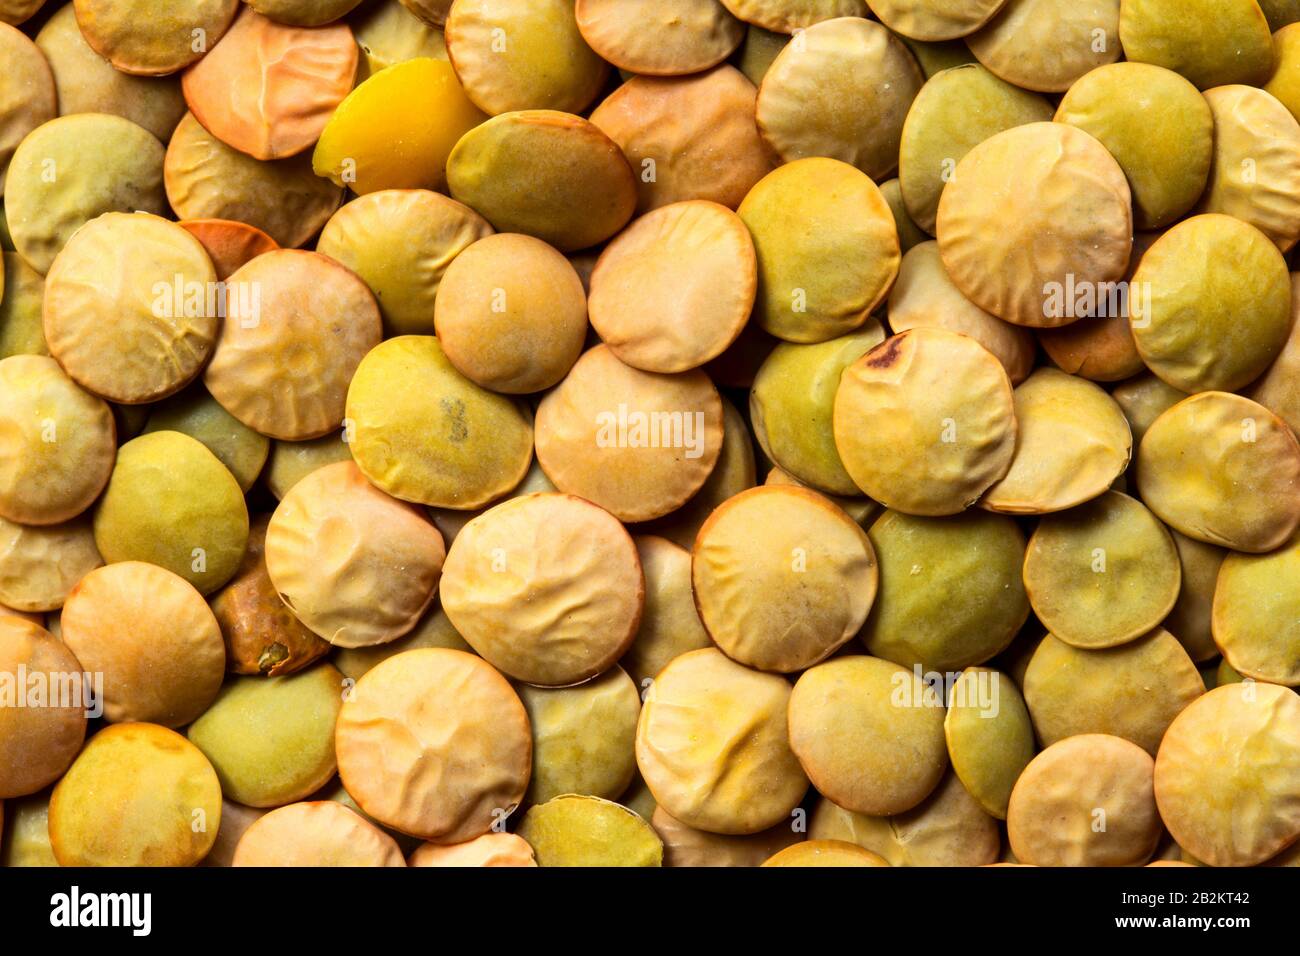 The Lentil Lens Culinaris It Is A Bushy Annual Plant Of The Legume Family Grown For Its Lens Shaped Seeds Stock Photo